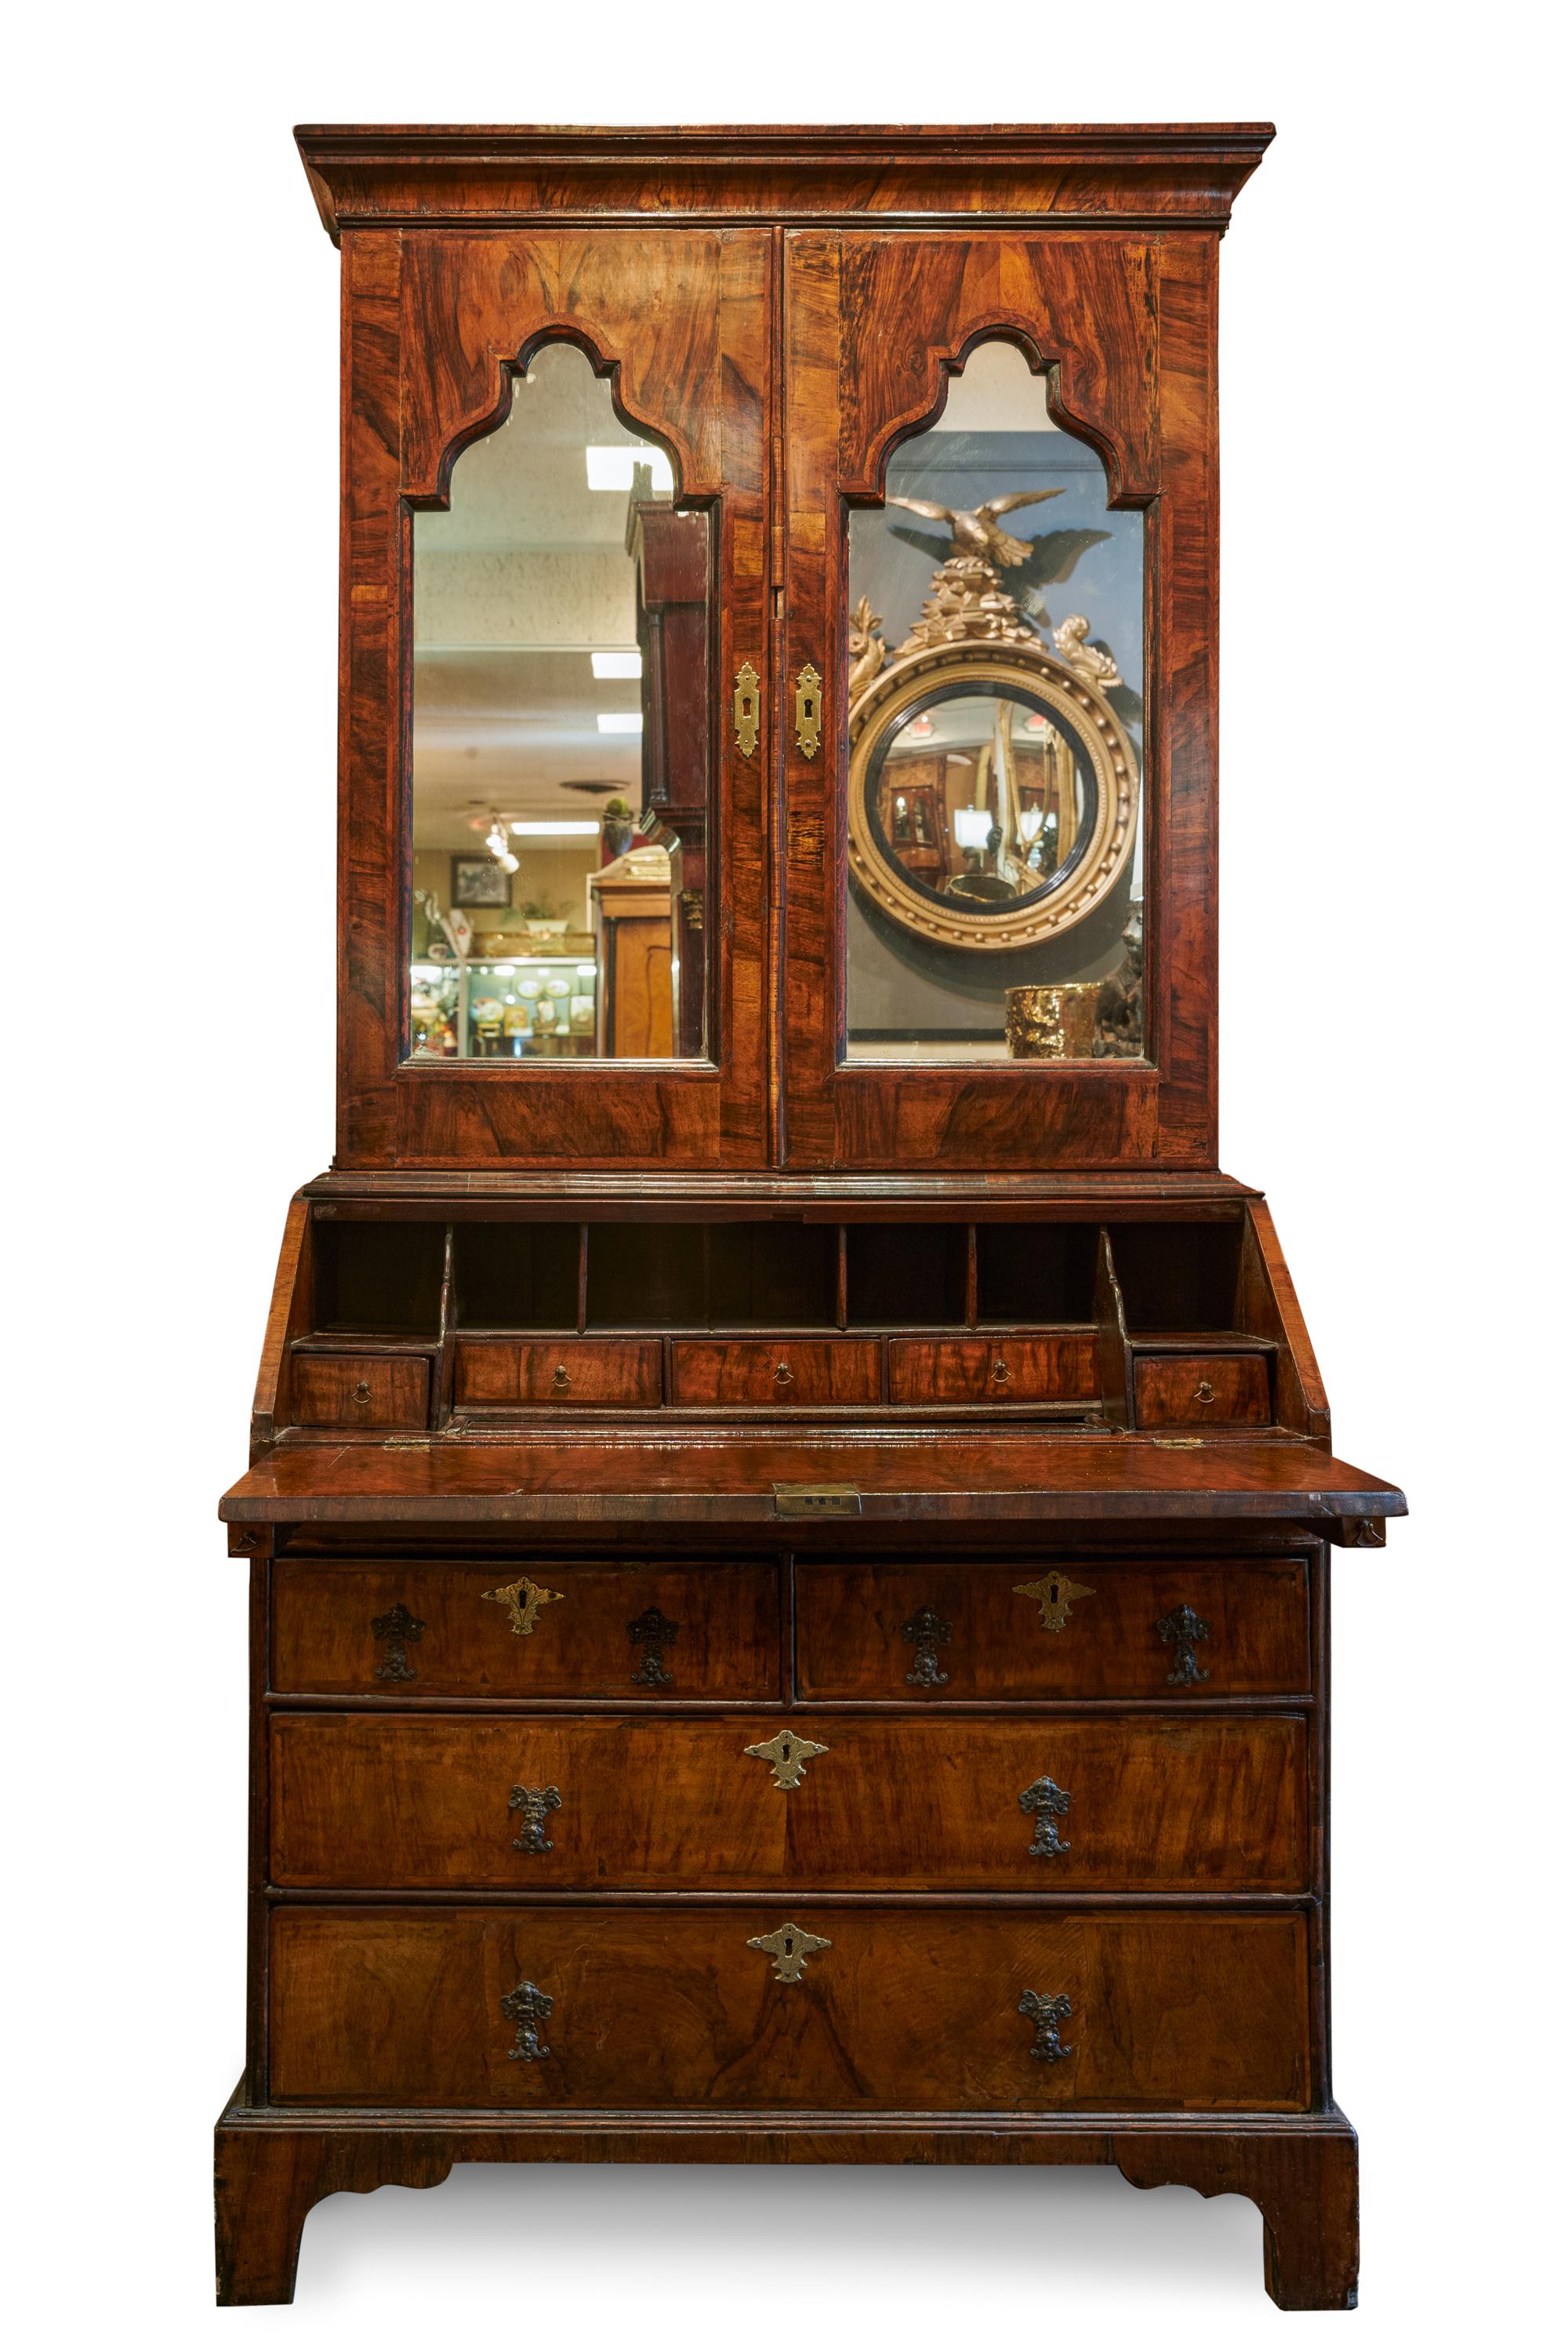 George II Inlaid walnut bureau bookcase
Mirrored uppercase with pigeonholes and shelves
Mid-18th Century
Measures: 77.5